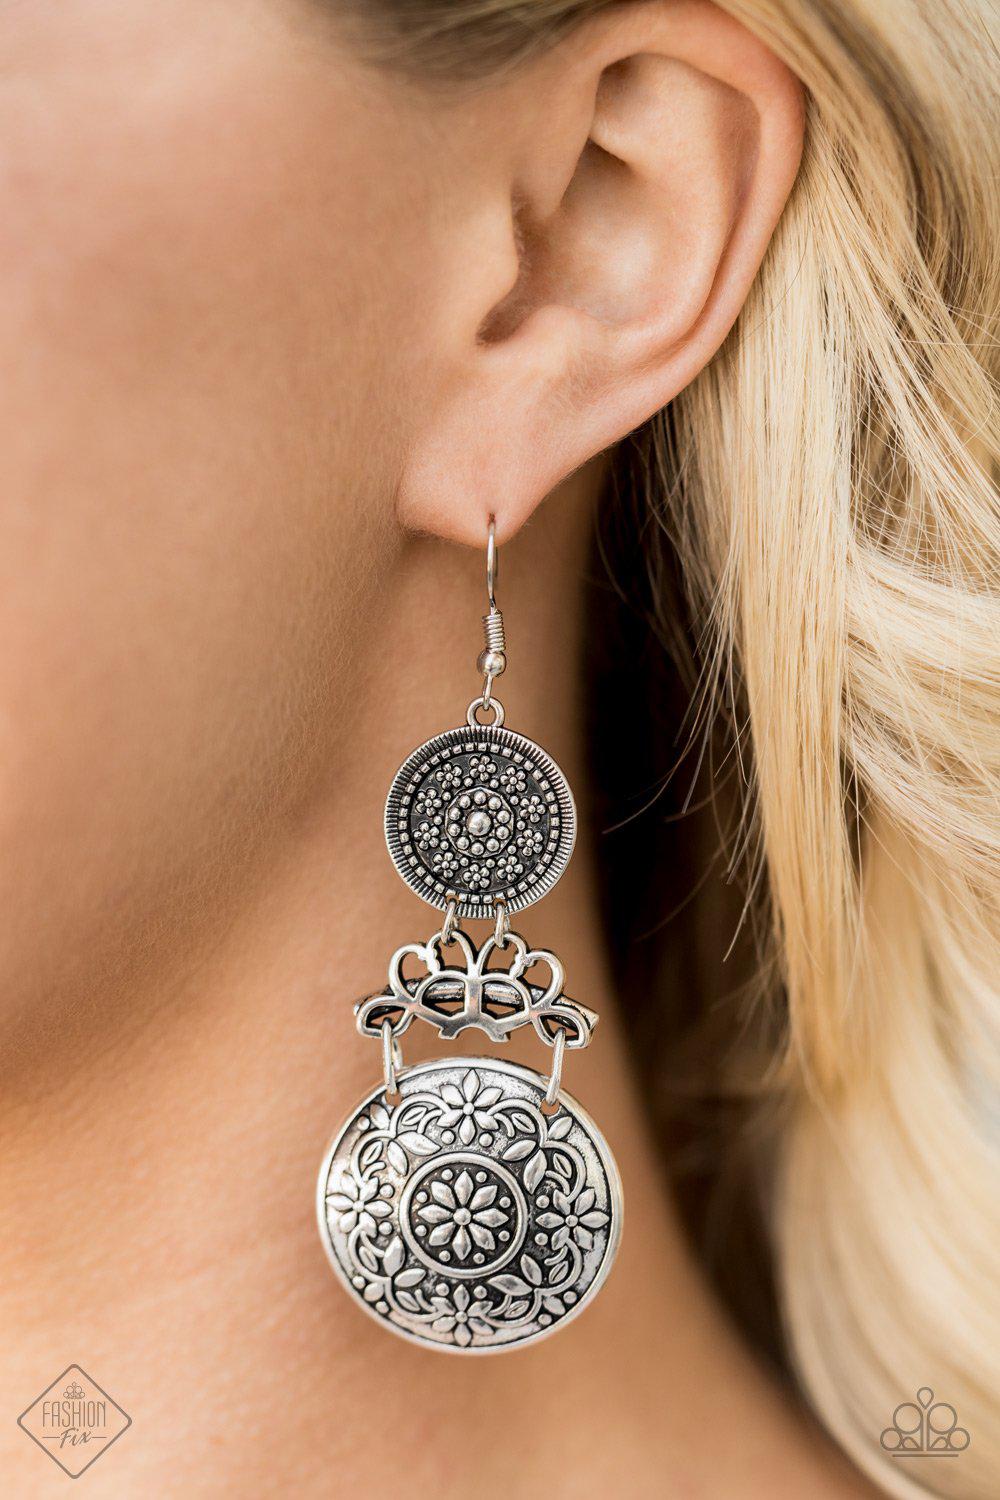 Glimpses of Malibu Complete Trend Blend (4 pc set) August 2020 - Paparazzi Accessories Fashion Fix-Earrings-CarasShop.com - $5 Jewelry by Cara Jewels